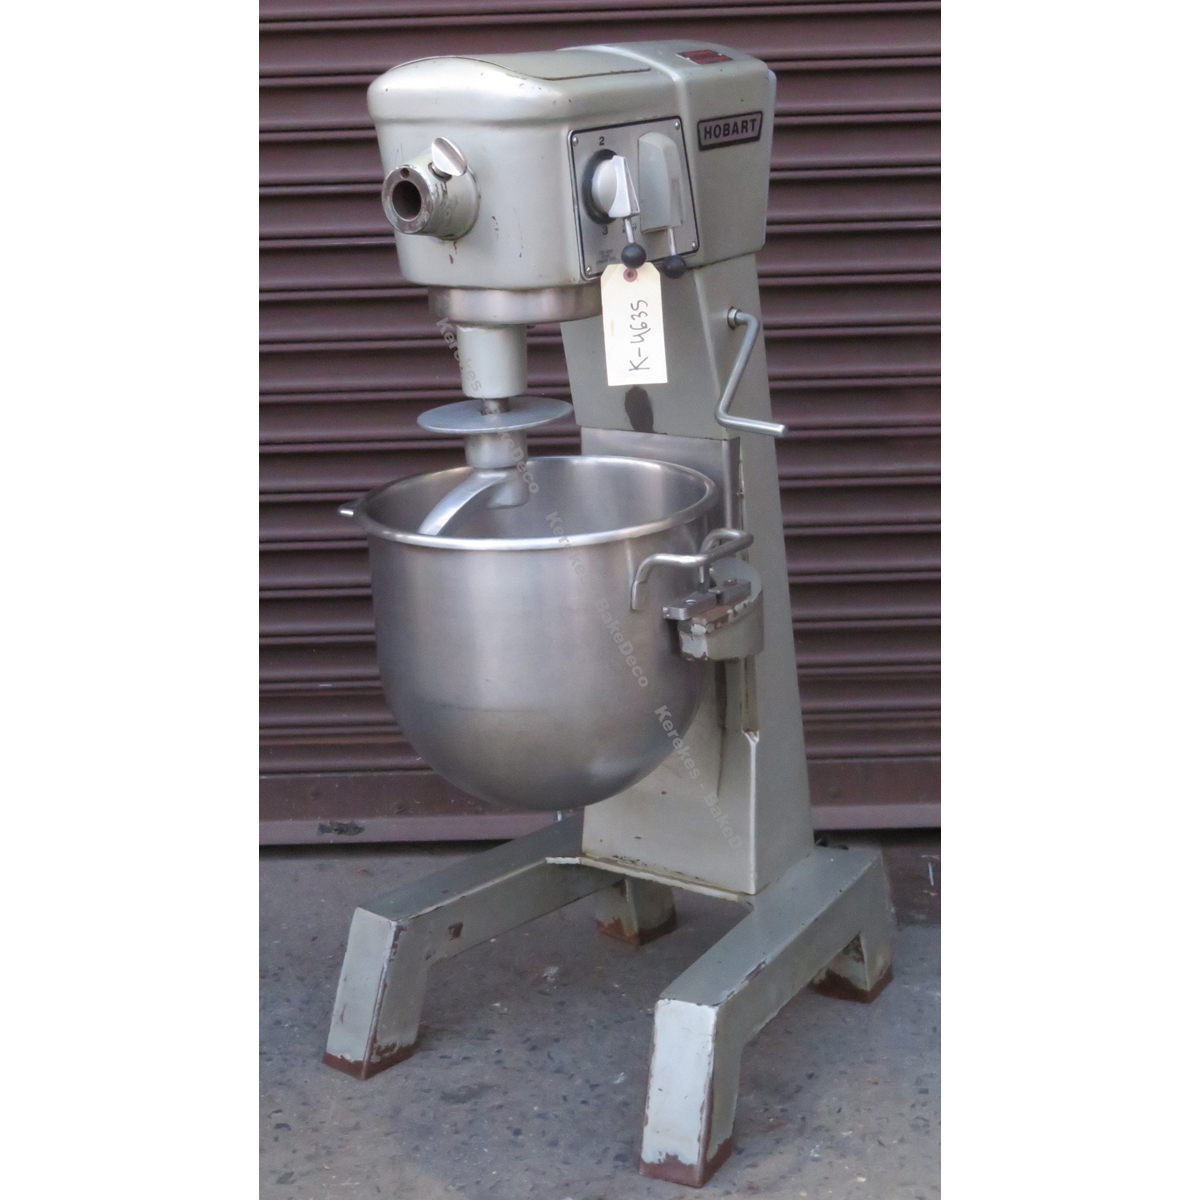 Hobart 30 Quart Mixer D300, Used Great Condition